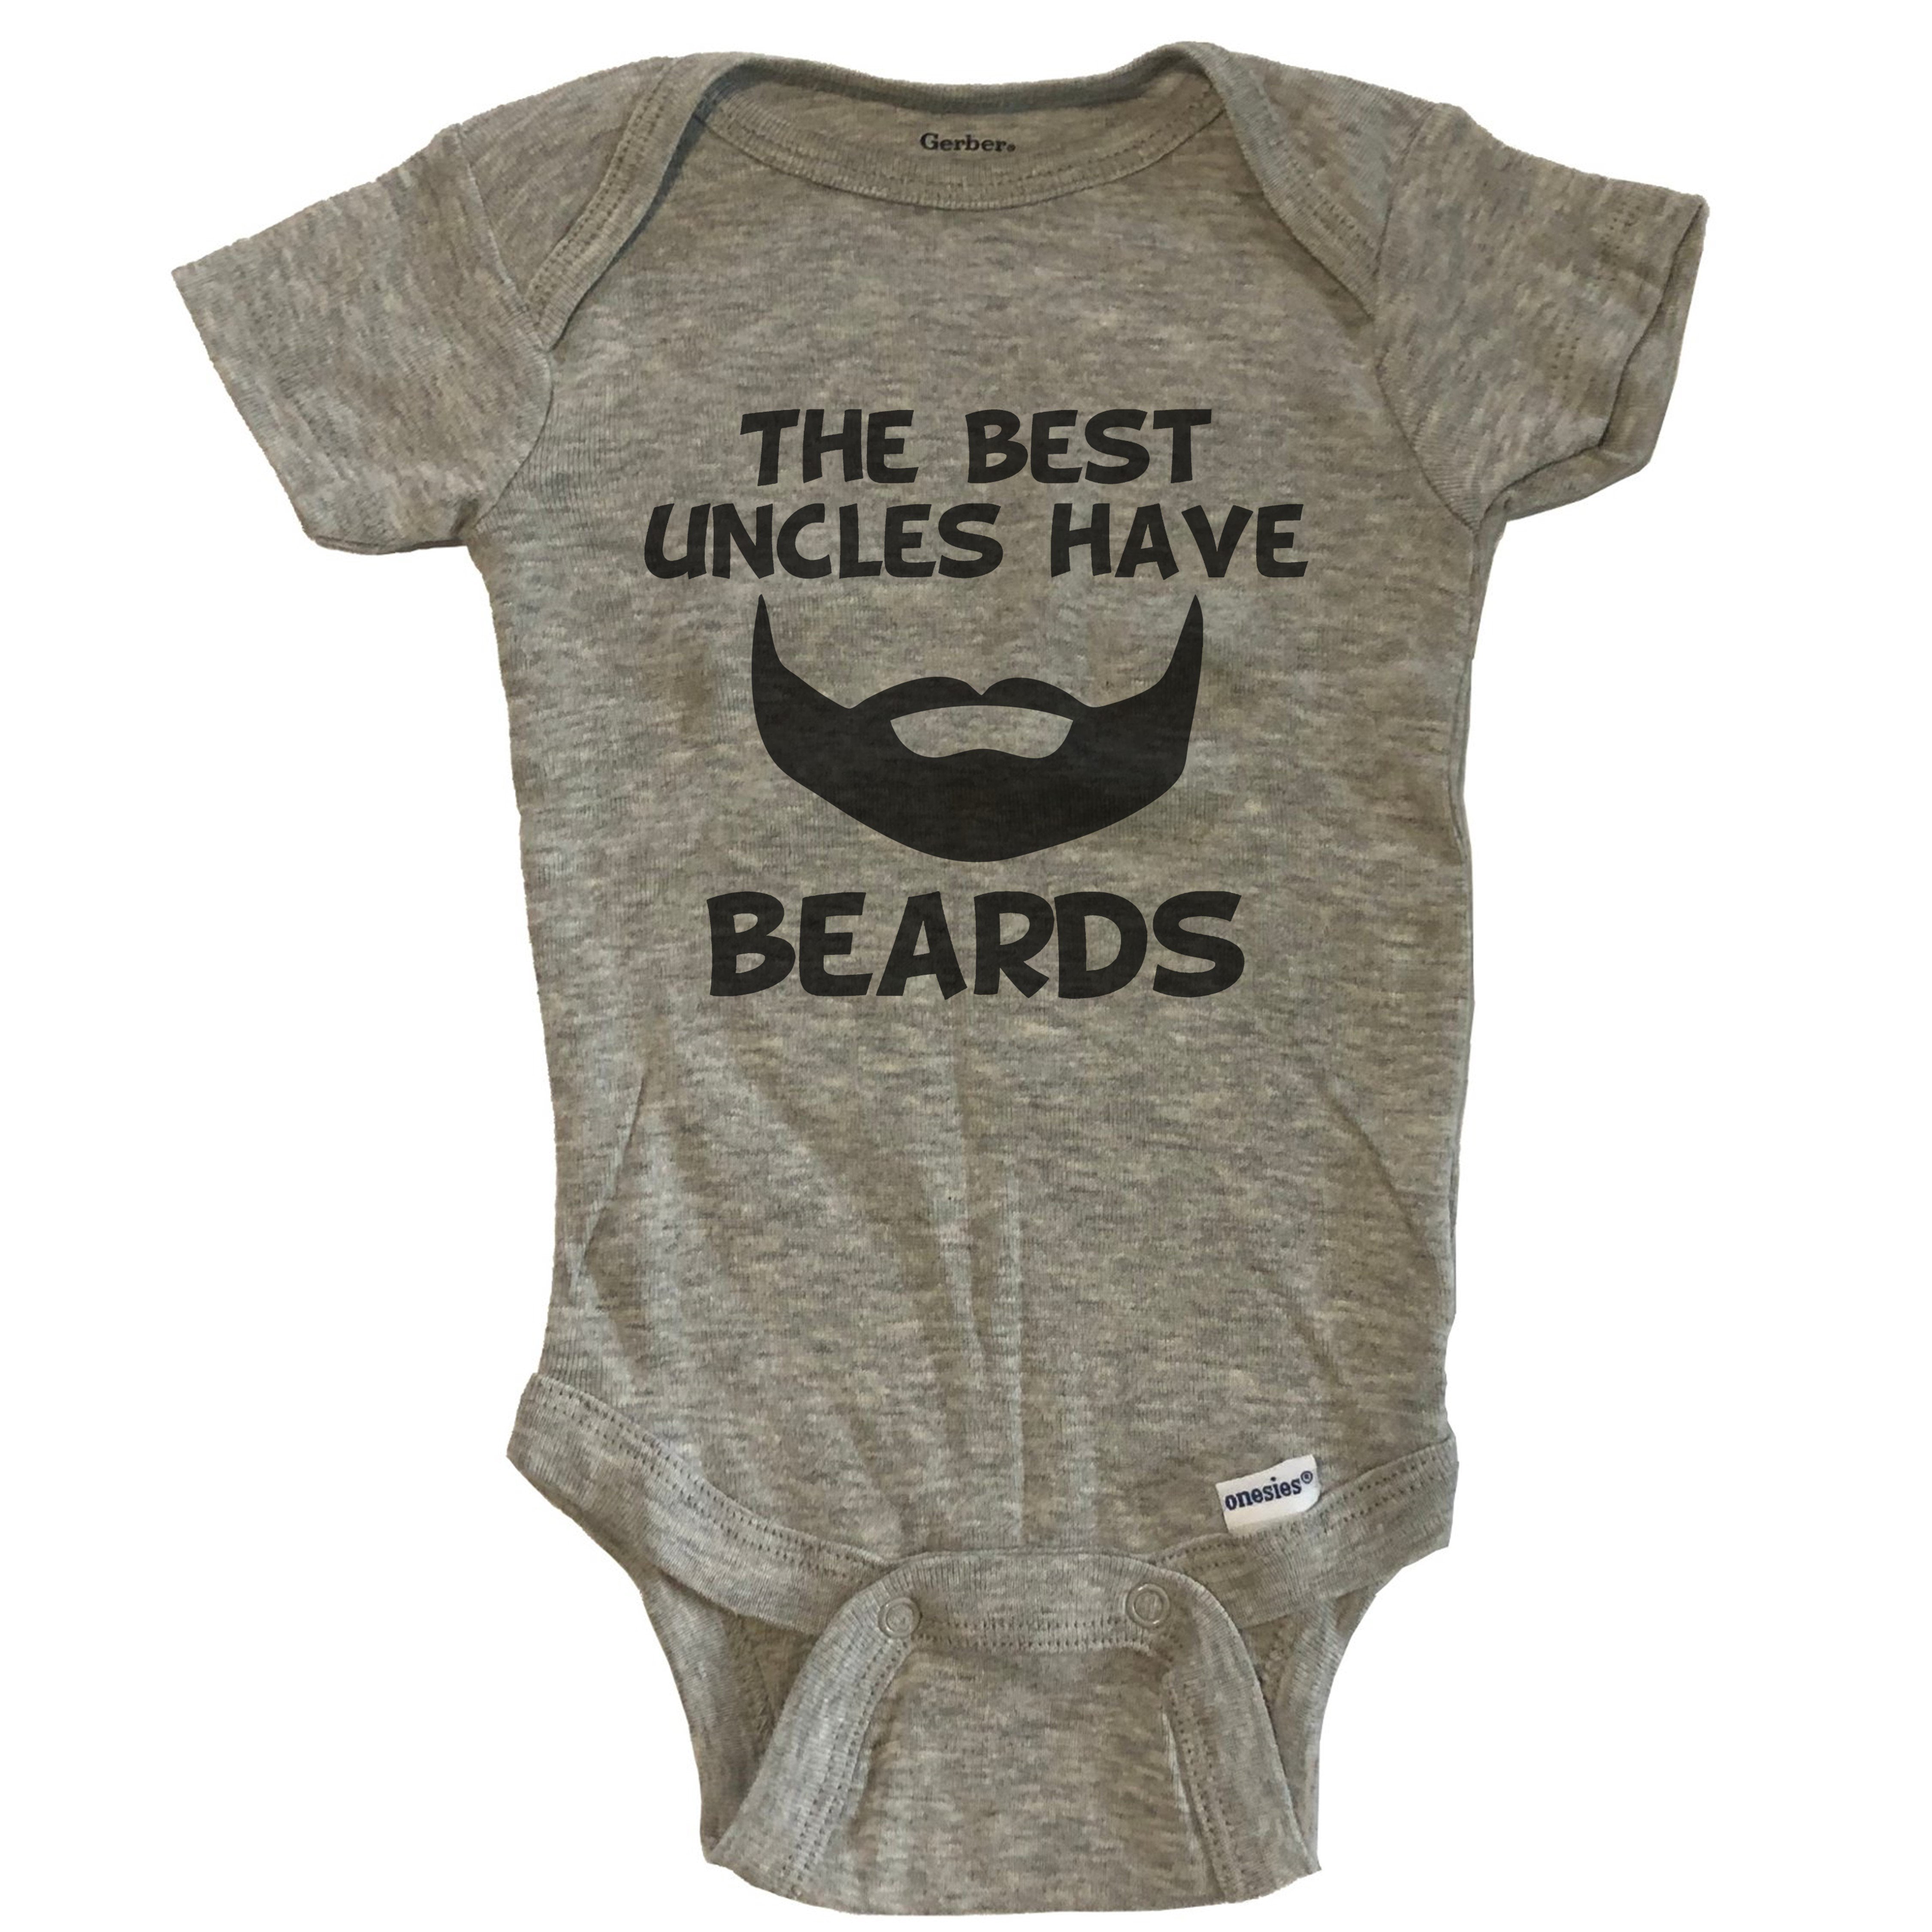 I Have A Fuzzy Uncle Baby Bodysuit One Piece for The Best Uncles with Beards